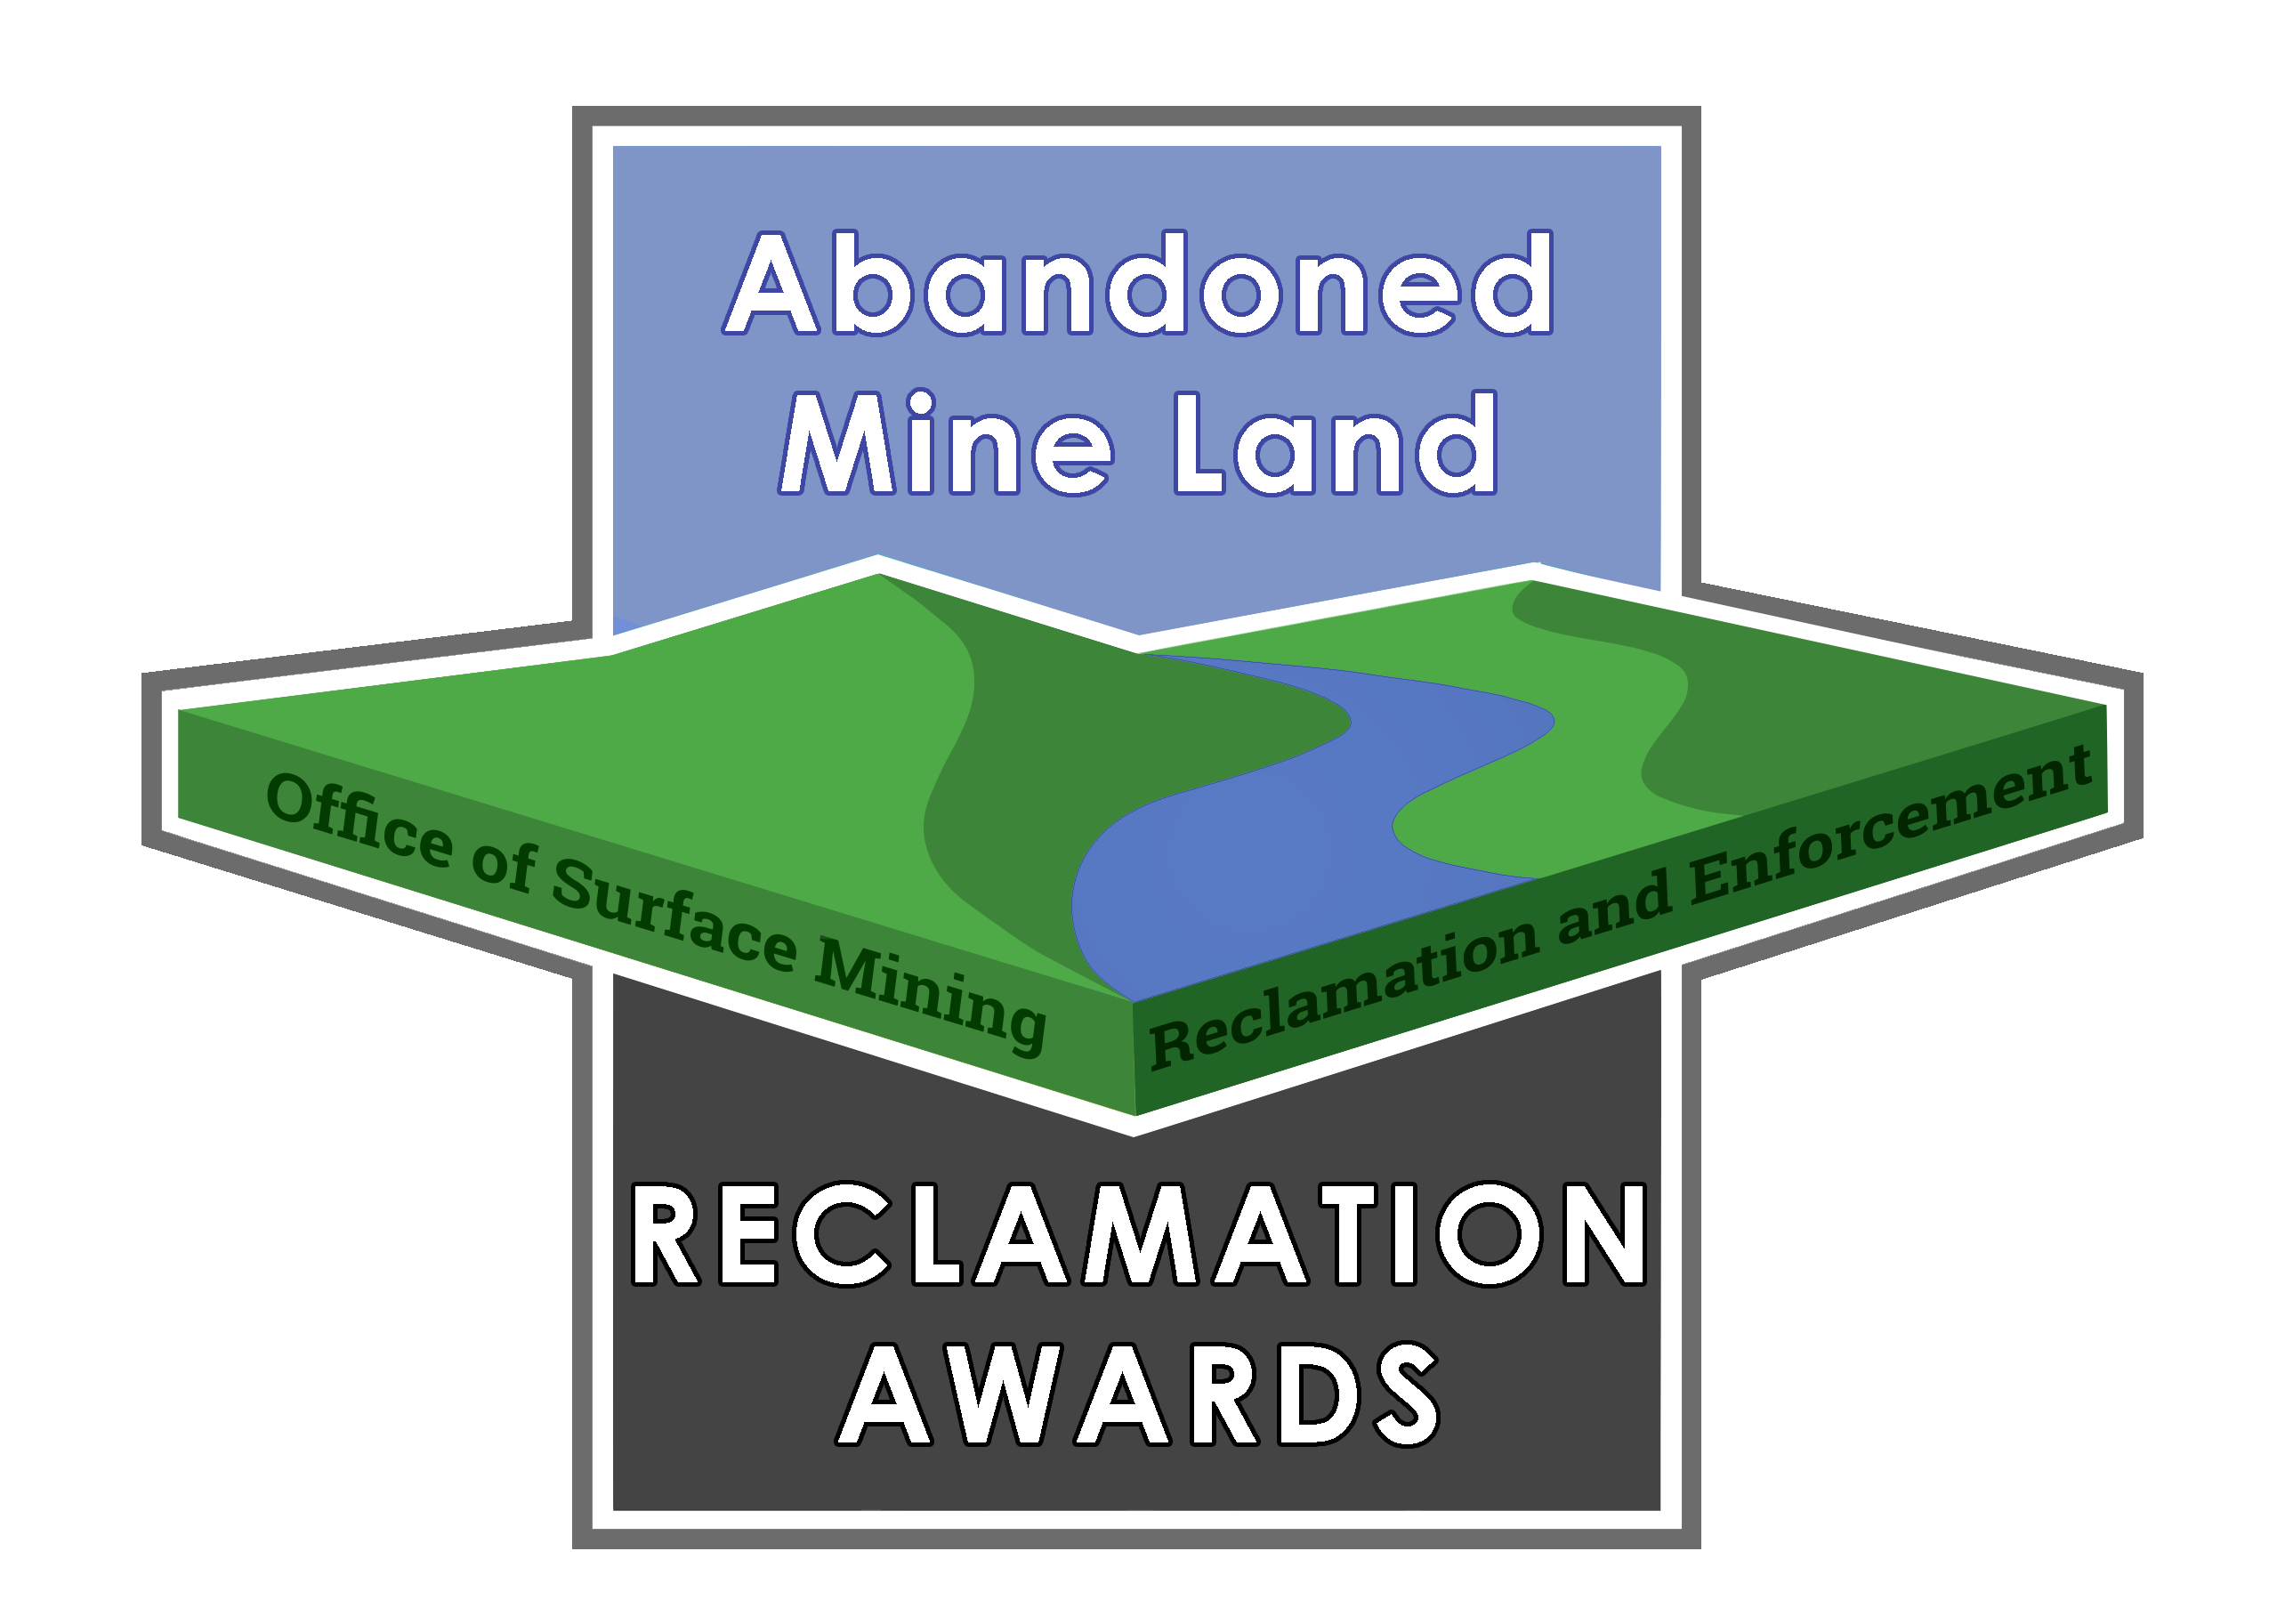 The logo for the Abandoned Mine Land Reclamation Awards.